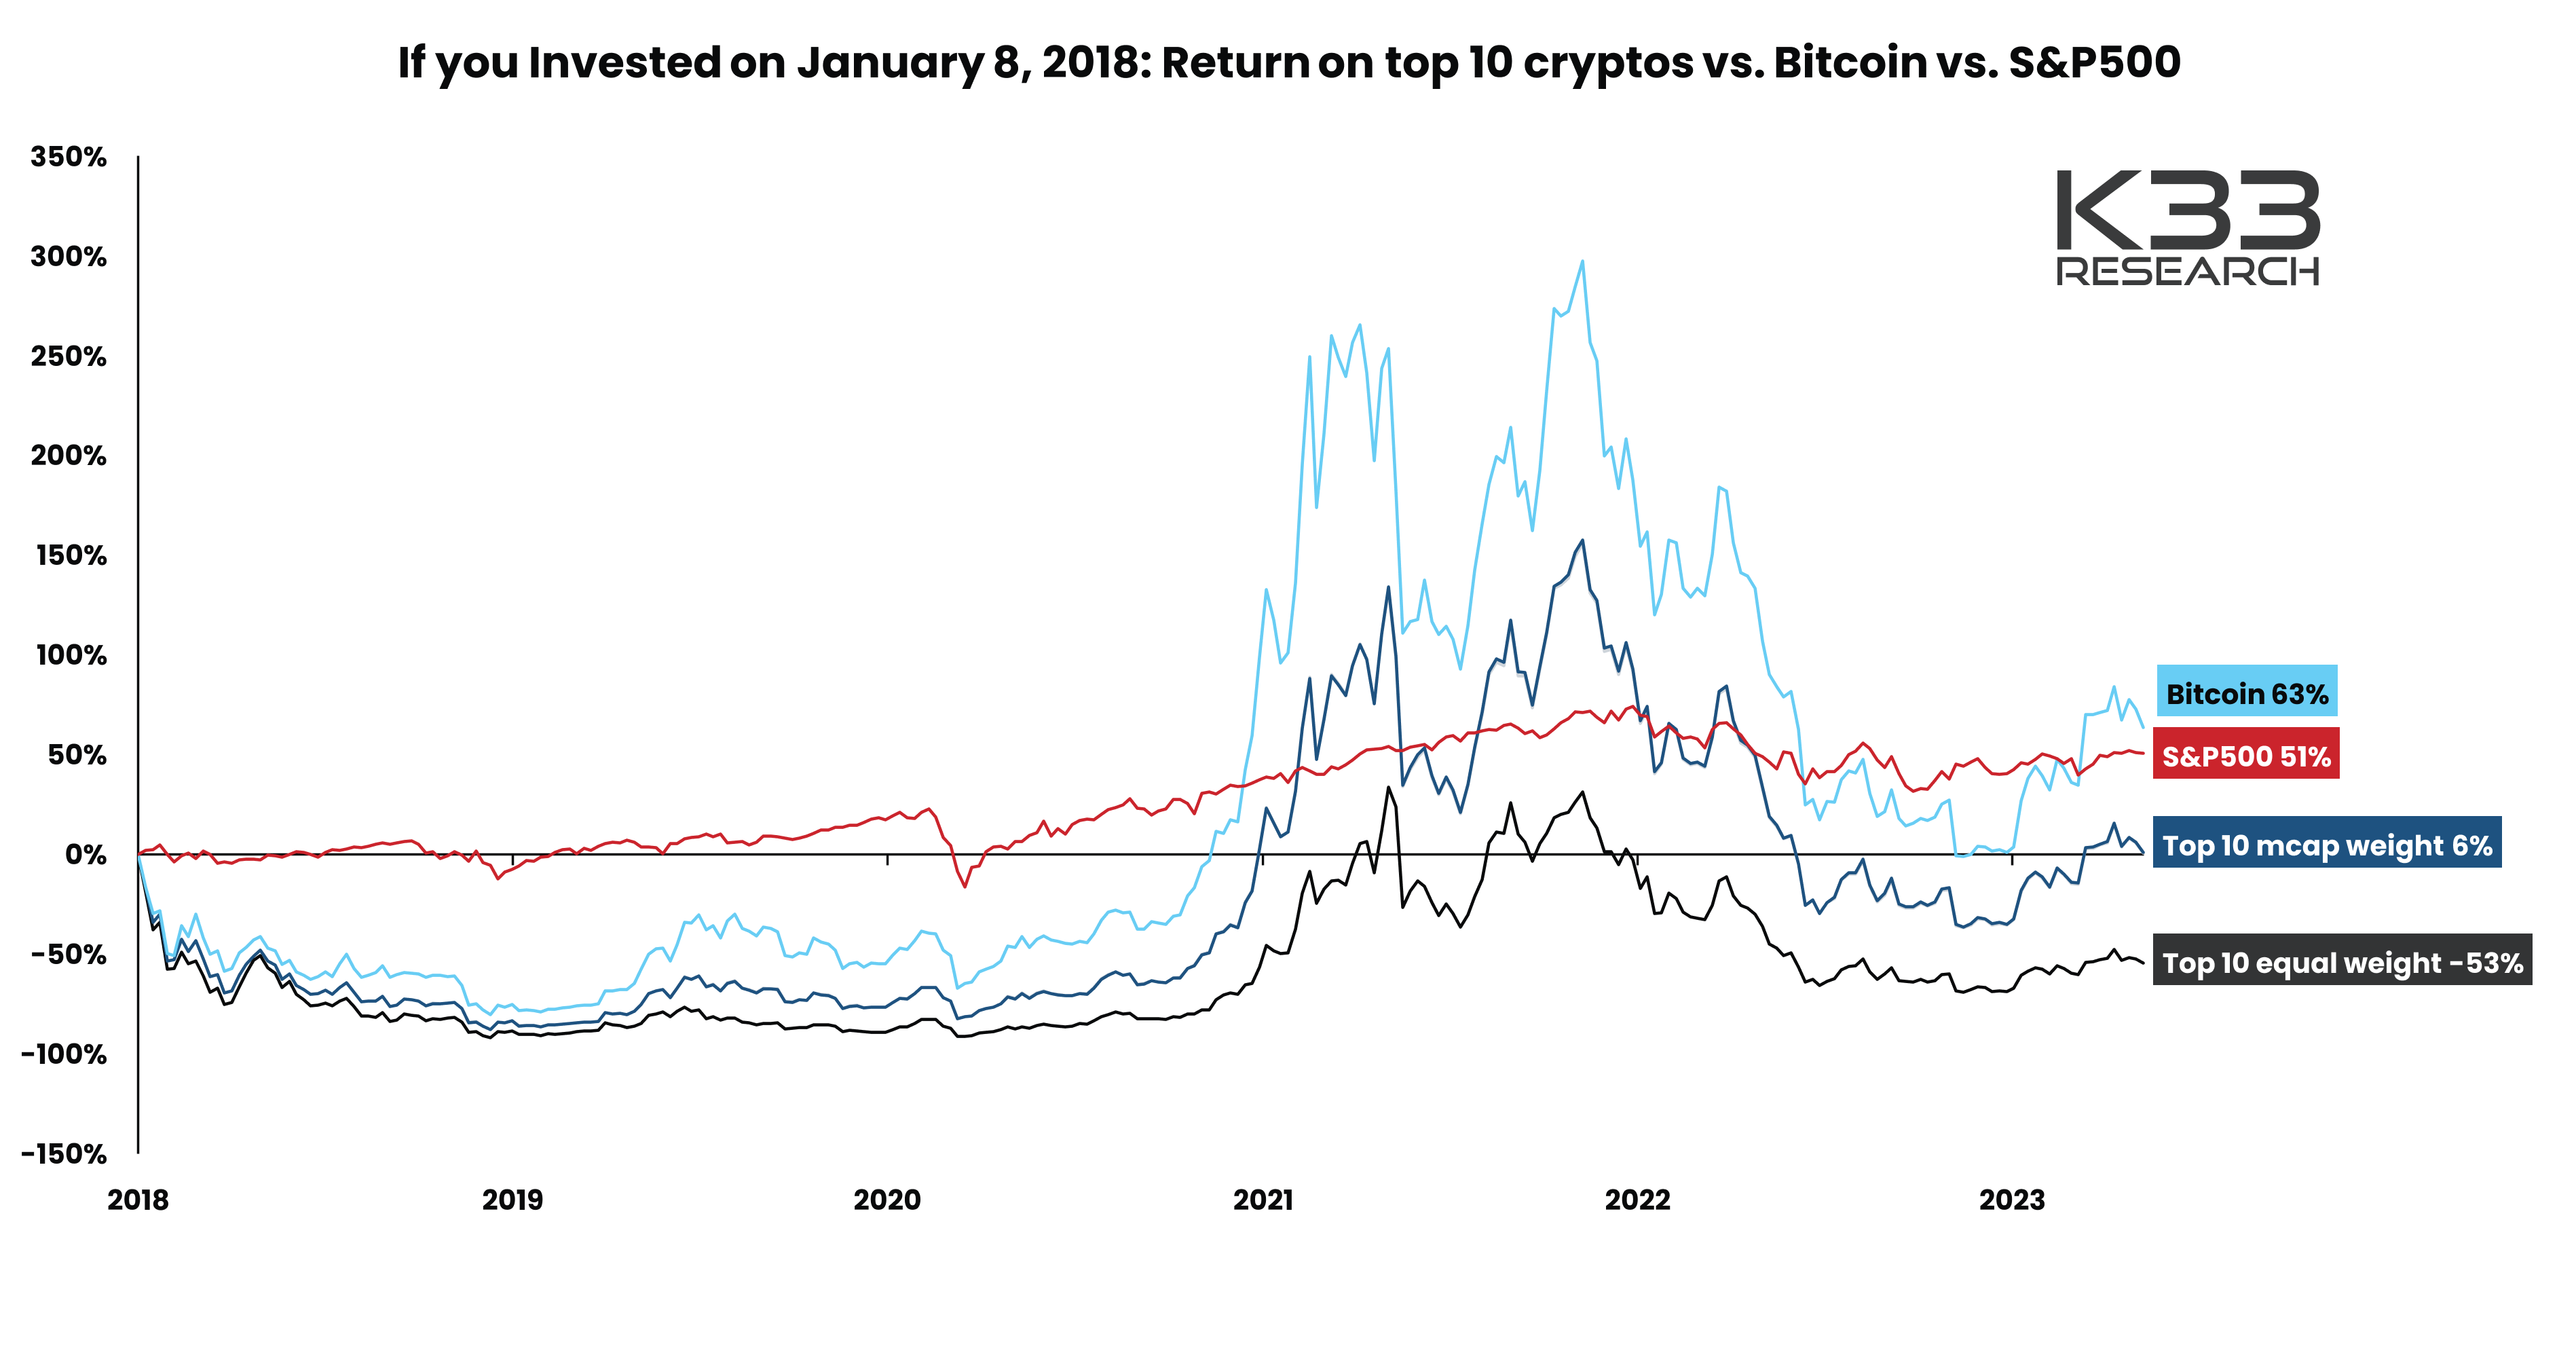 Historical chart of BTC vs S&amp;P500 vs Altcoin returns from K33 research